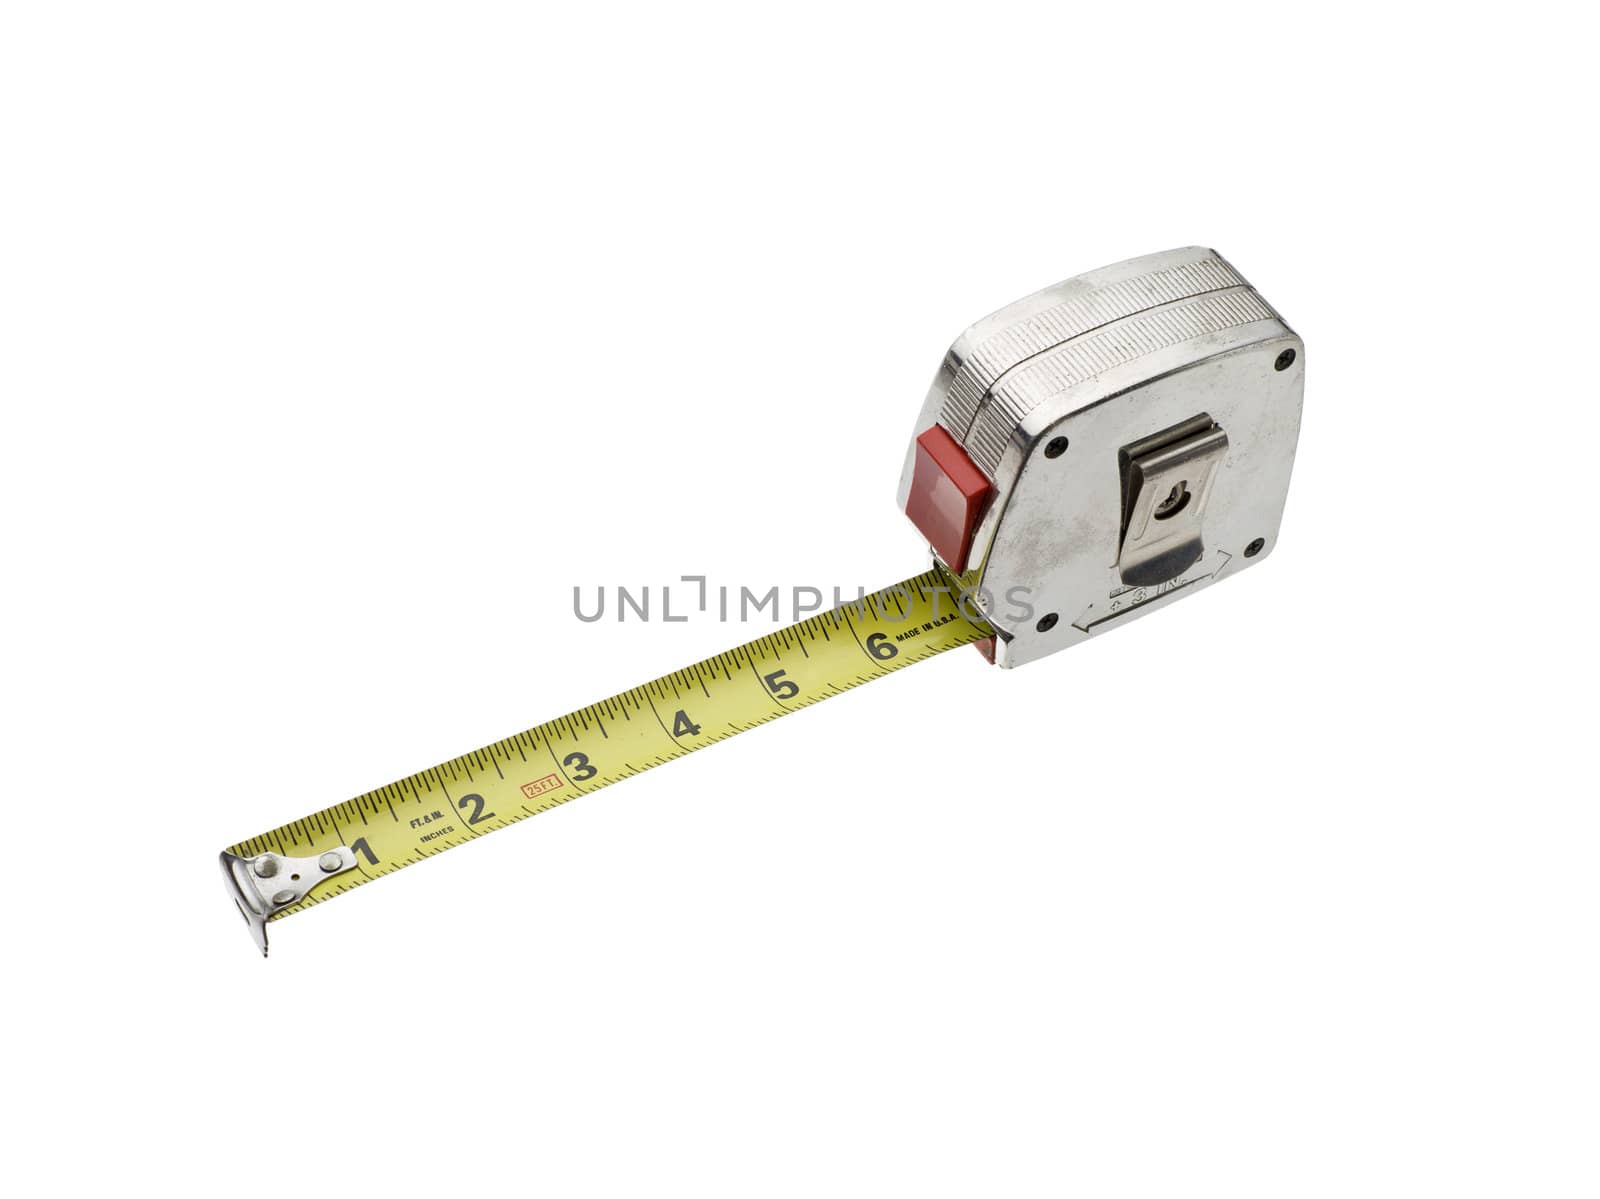 A measuring tape on a white background